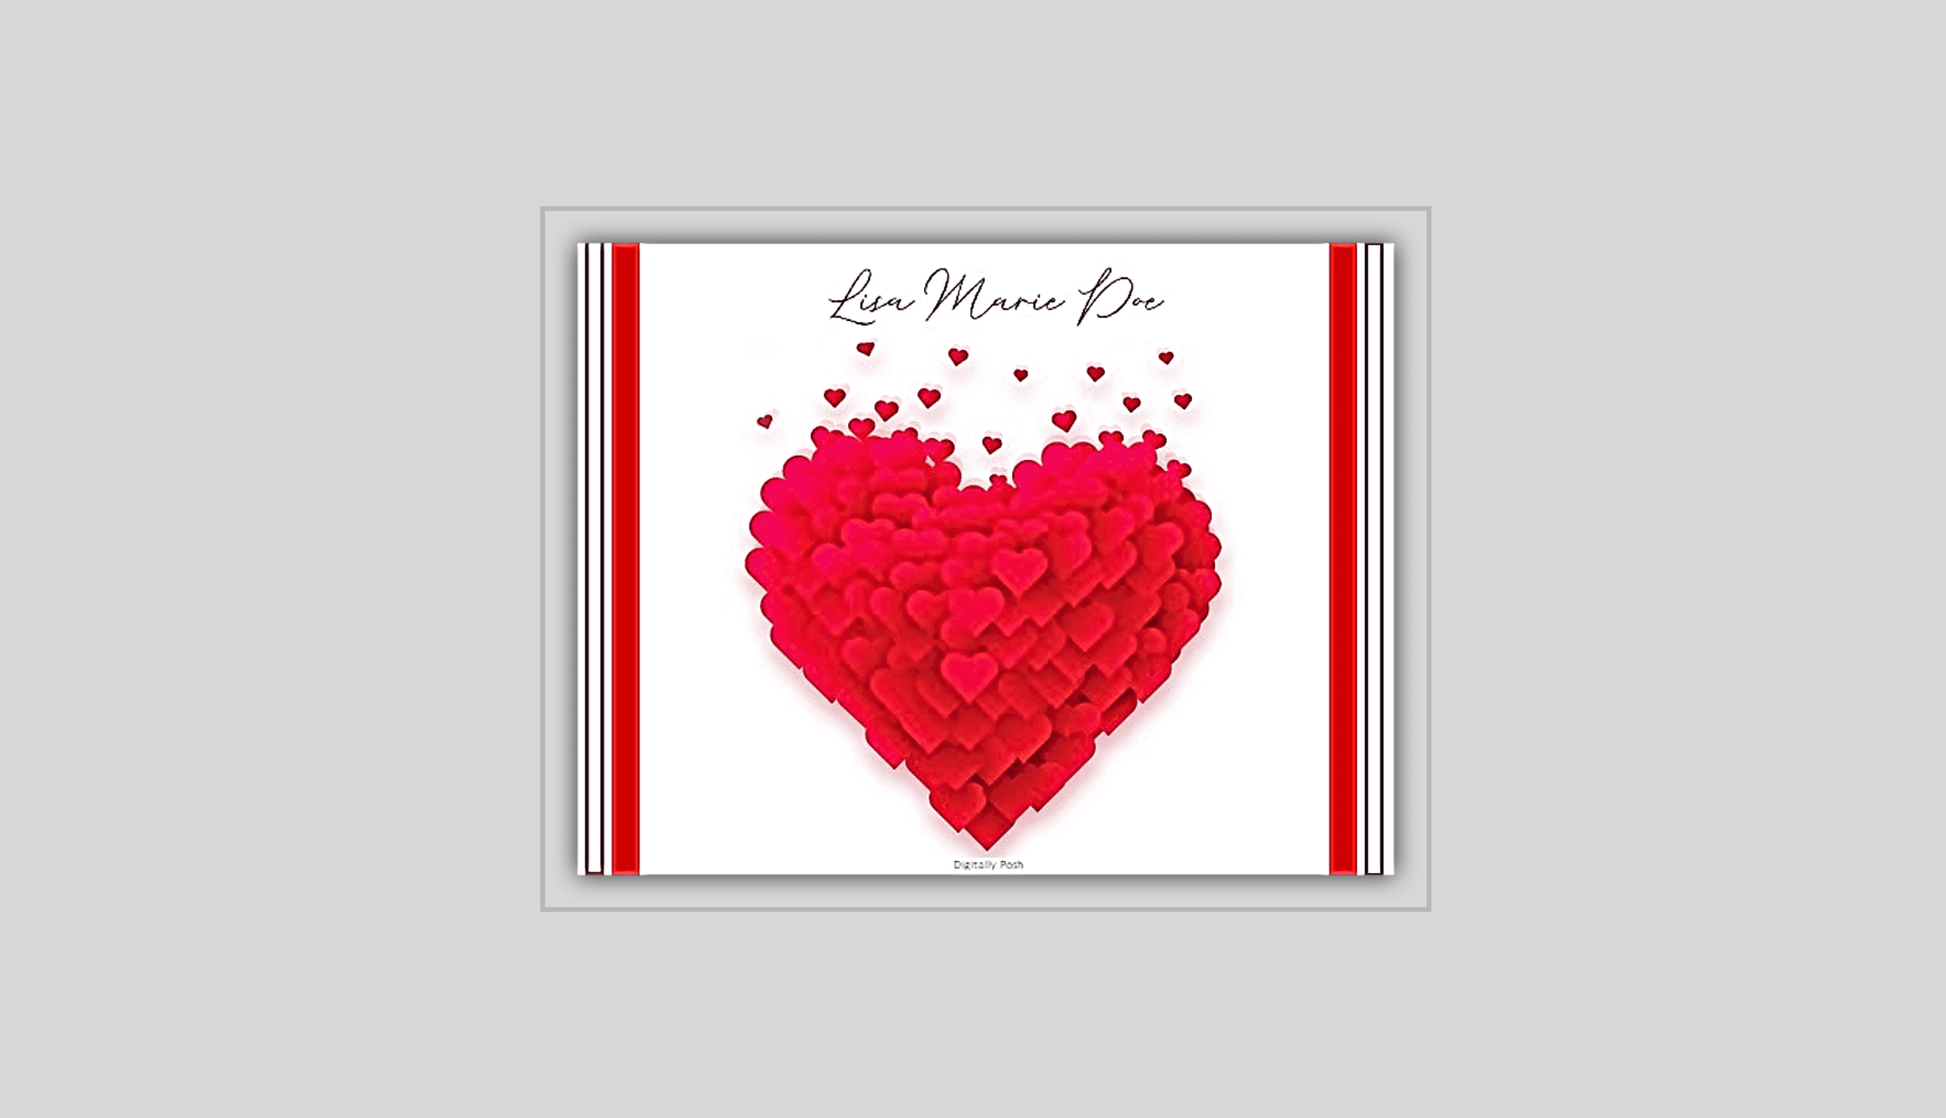 Personalized Note Card: Add a Personal Touch with Customized Stationery for Every Occasion. Power of Love Notecard